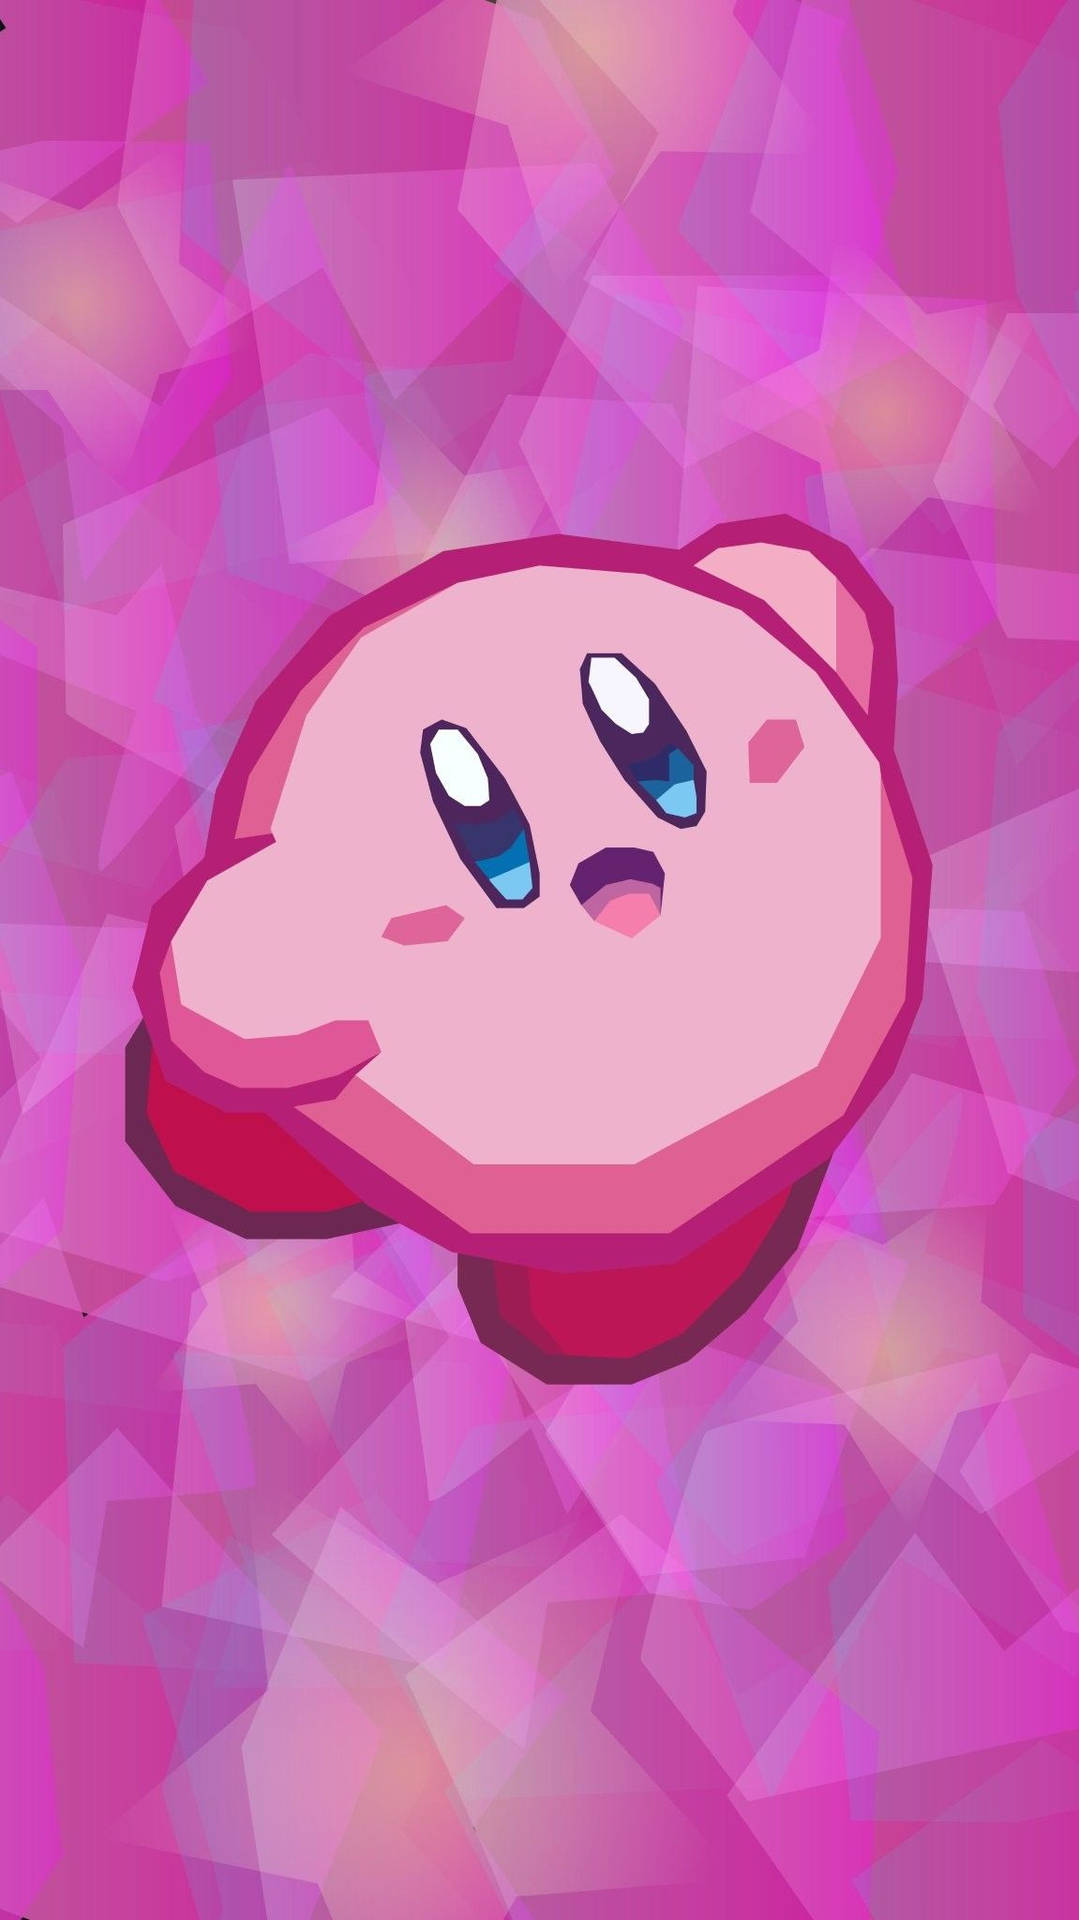 Cool HD Kirby wallpaper with pink aesthetic and polygon design